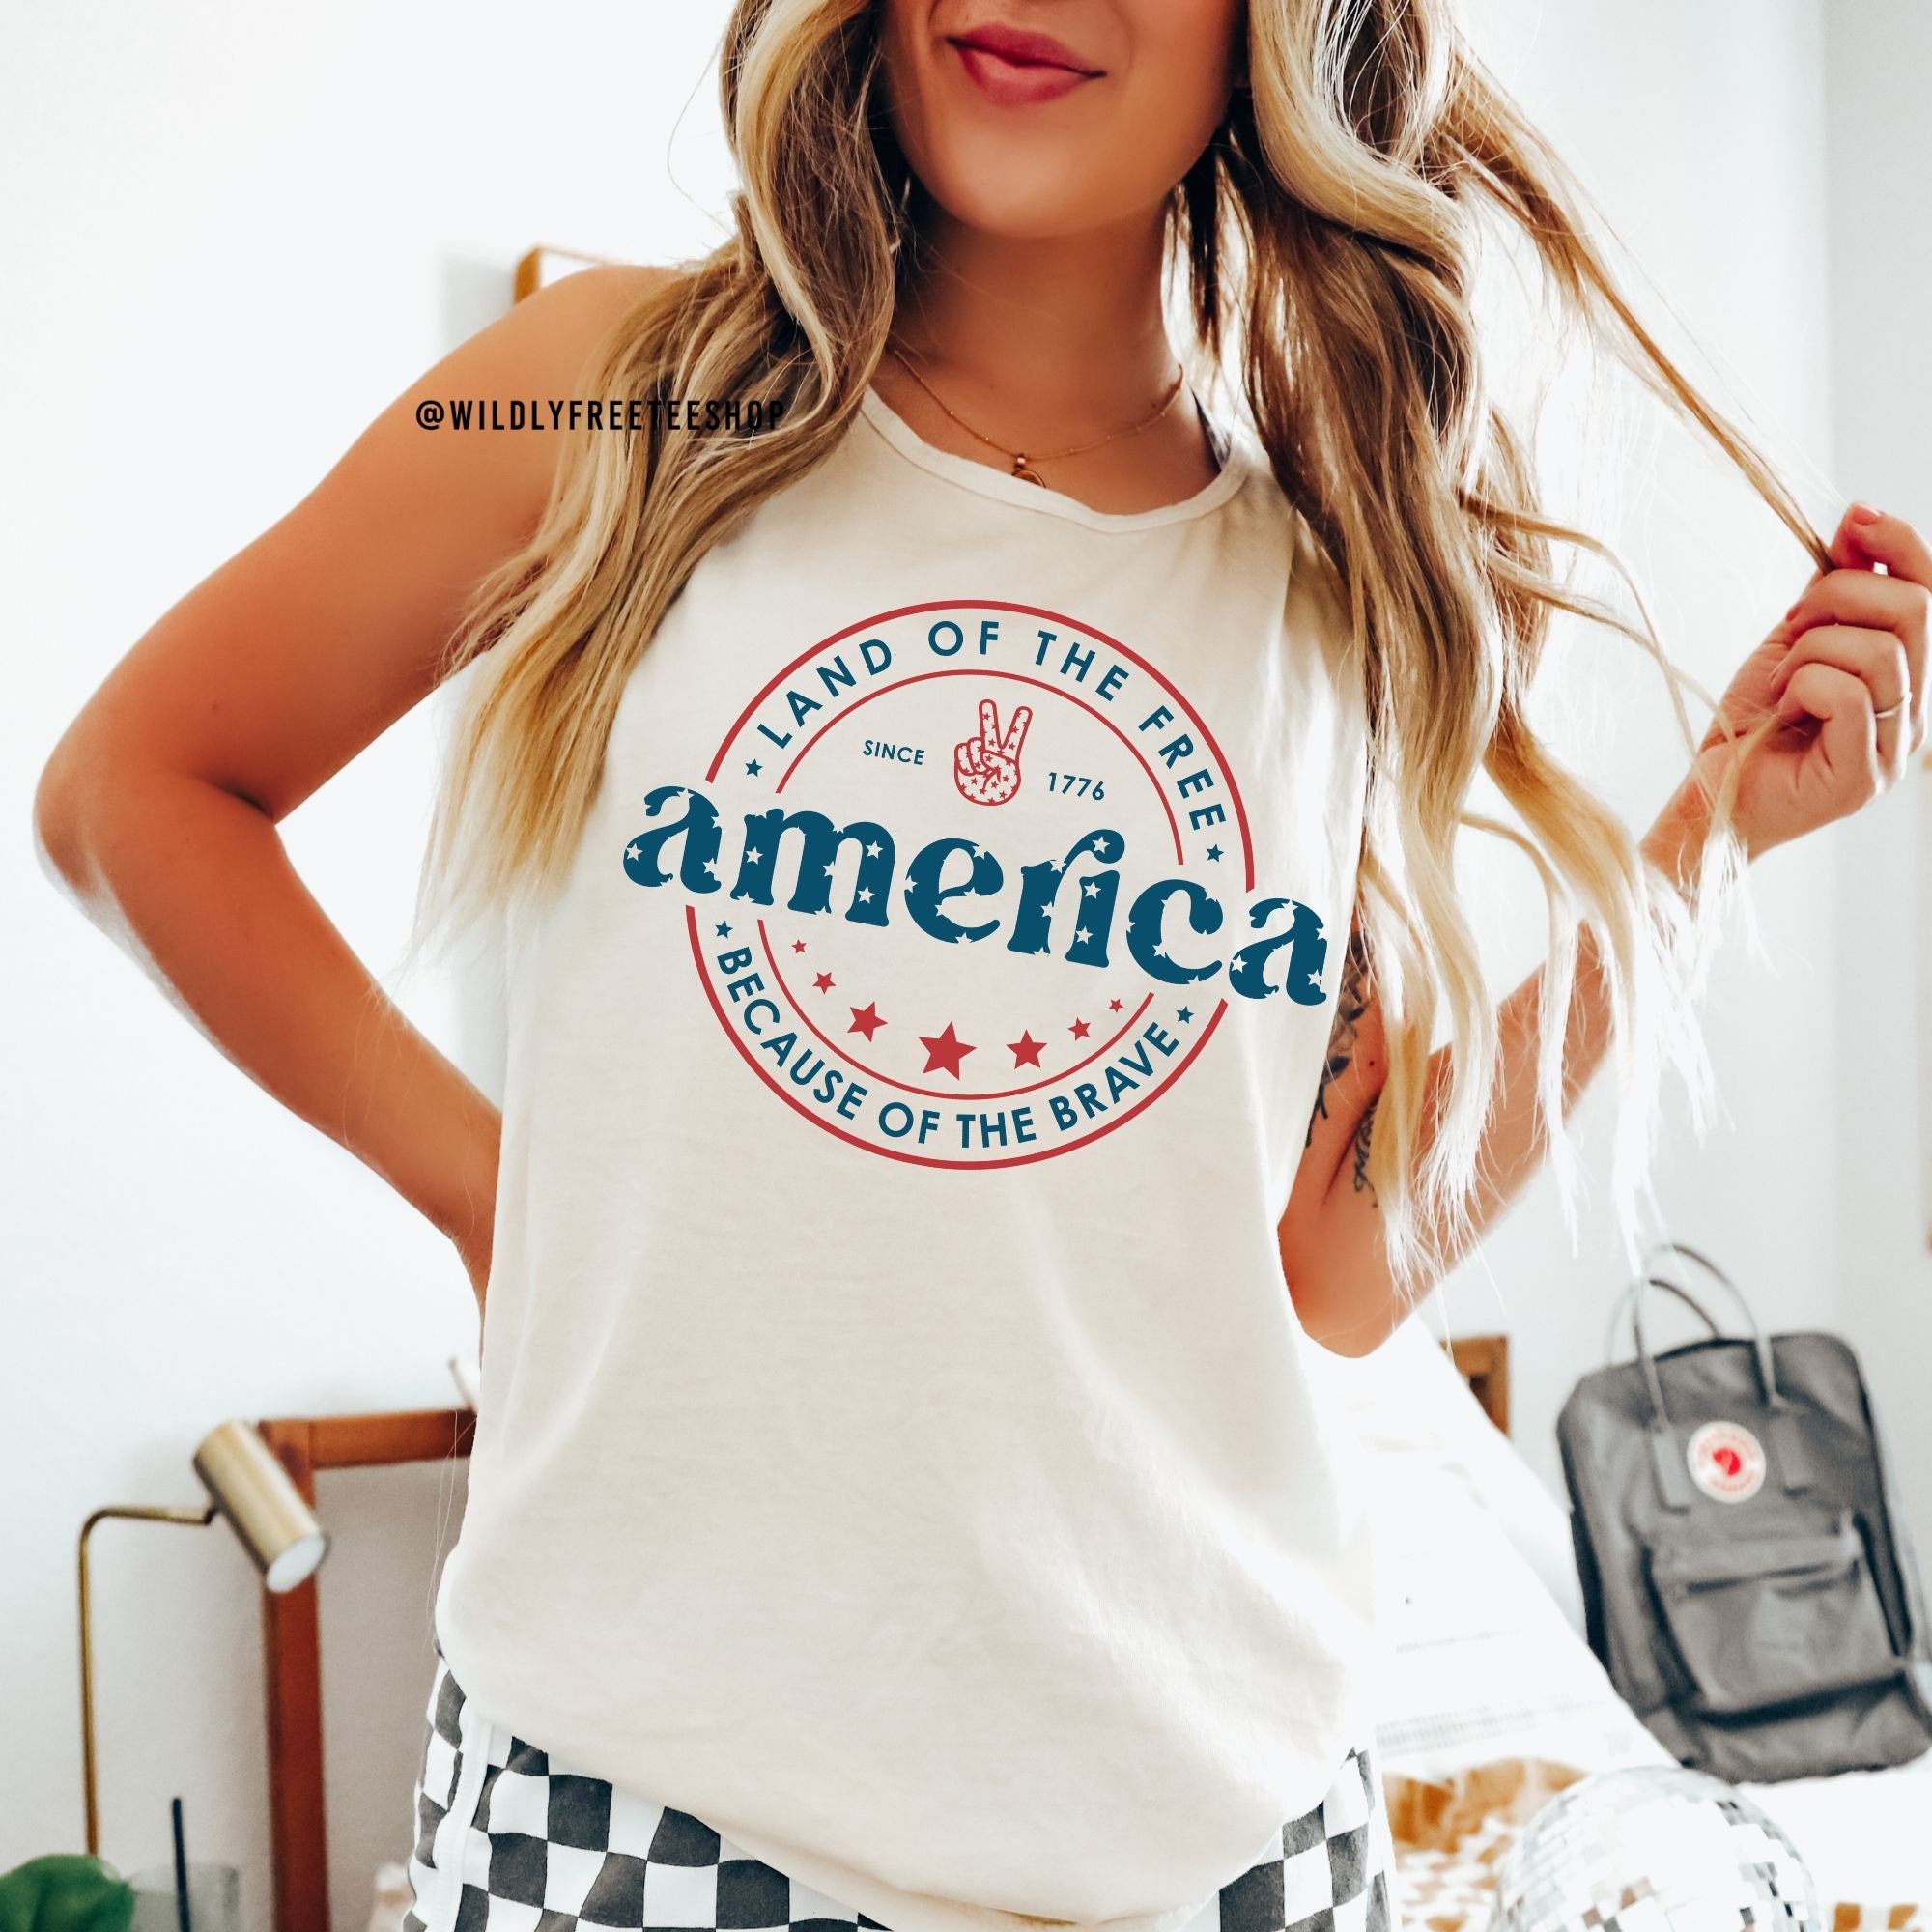 Ukap American Independence Day Tank Top for Women Fashion Summer Sleeveless Tops Casual USA Flag Print Vest Camisole Stripe Star T-Shirt Blouse